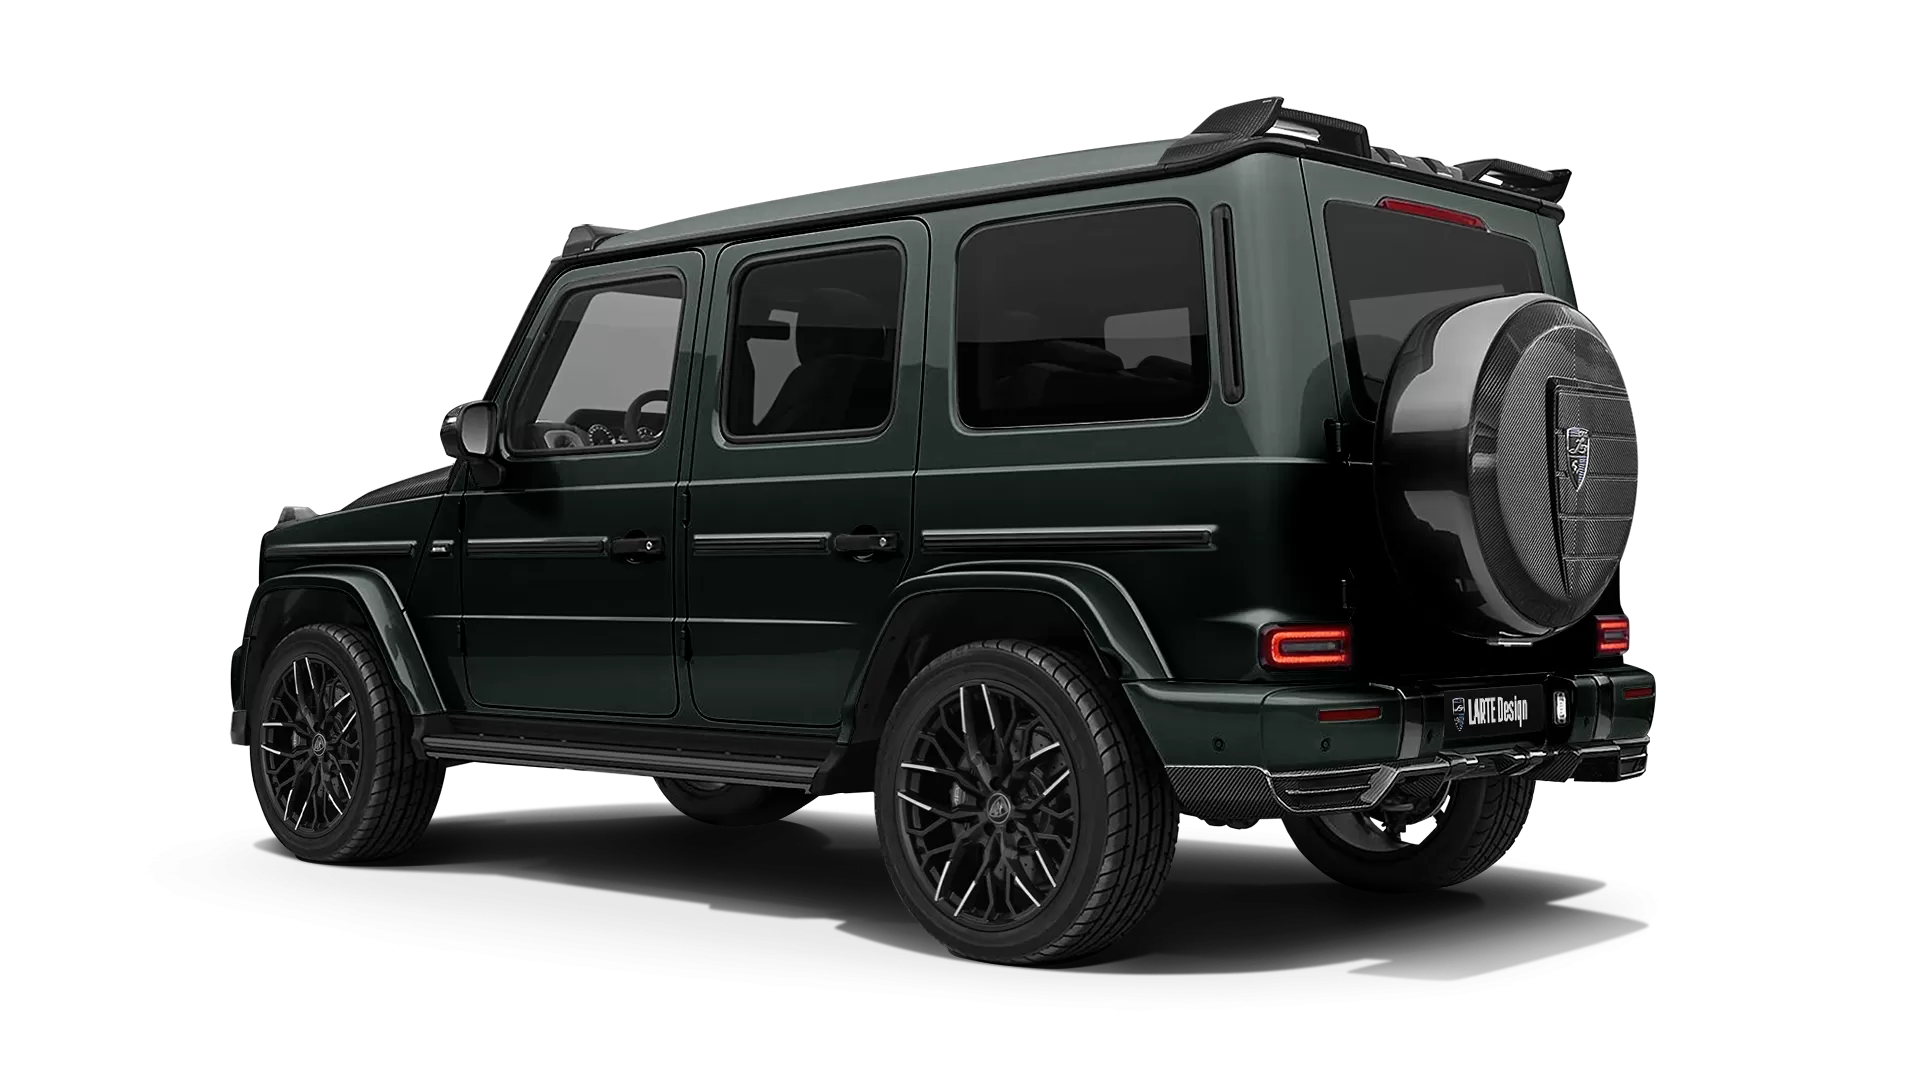 Mercedes G class W463 with carbon body kit: back view shown in Dark Green